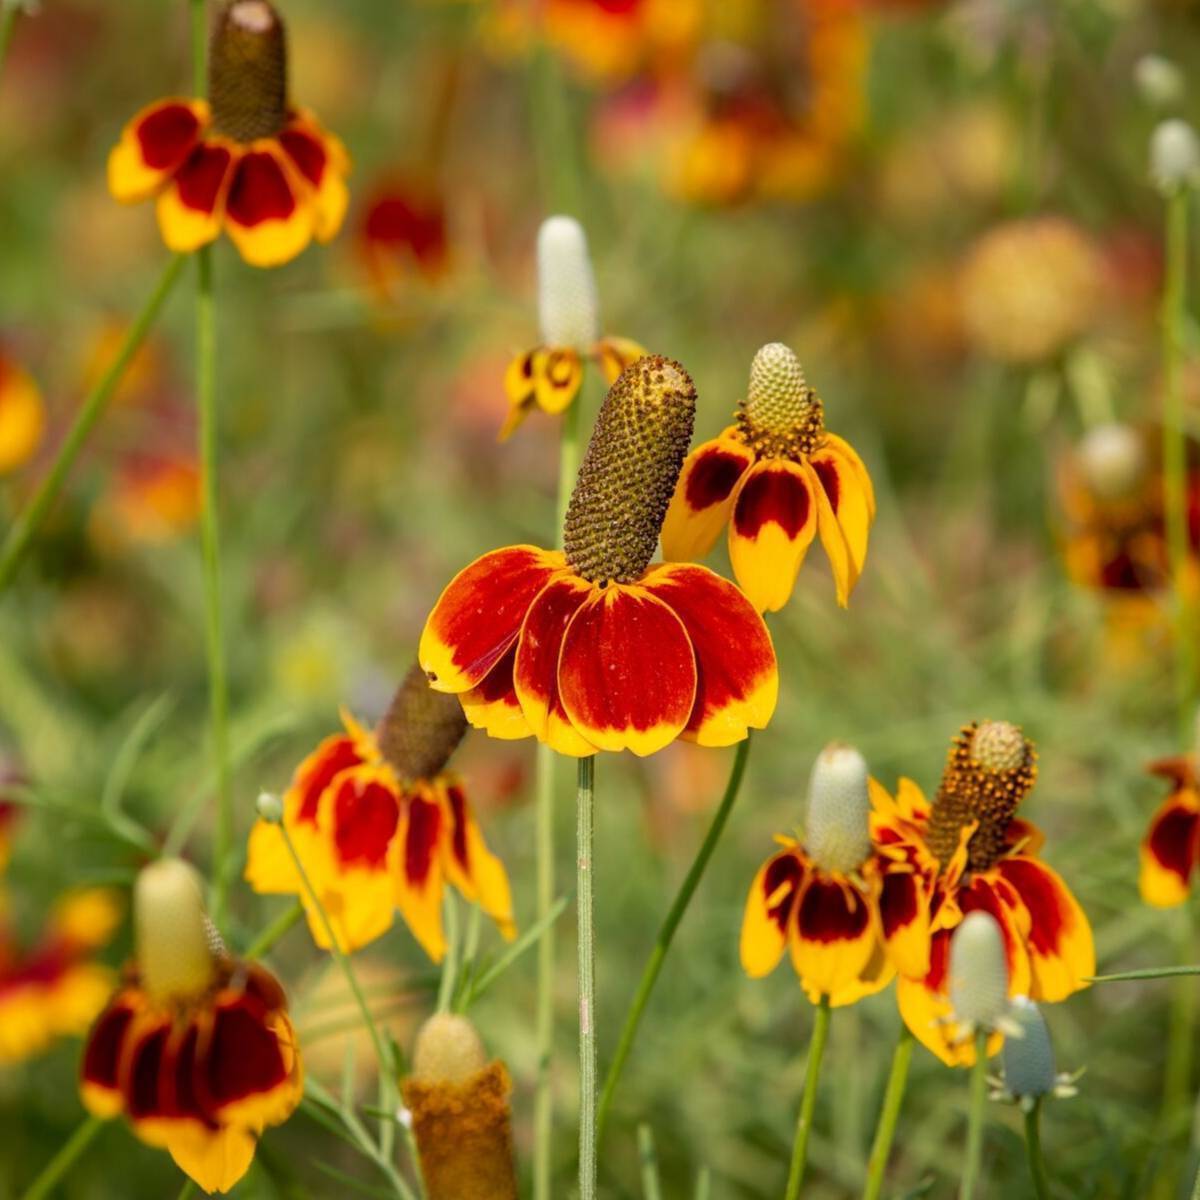 Mexican Hat Flower seeds The Seed Collection